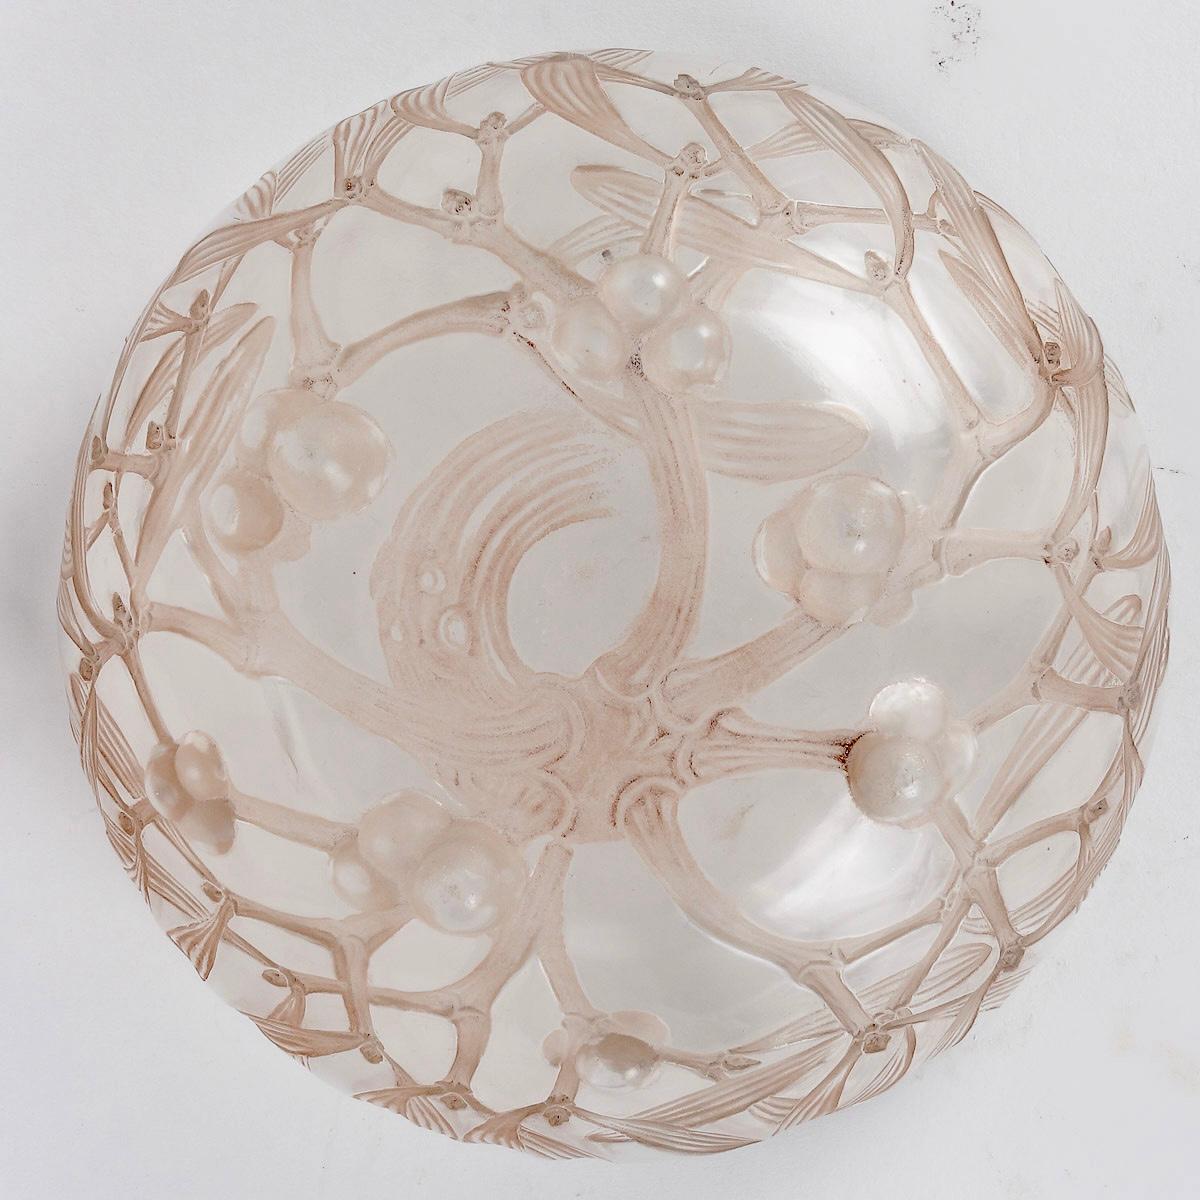 1921 René Lalique -Bowl Gui Mistletoe Glass with Sepia Patina In Good Condition For Sale In Boulogne Billancourt, FR